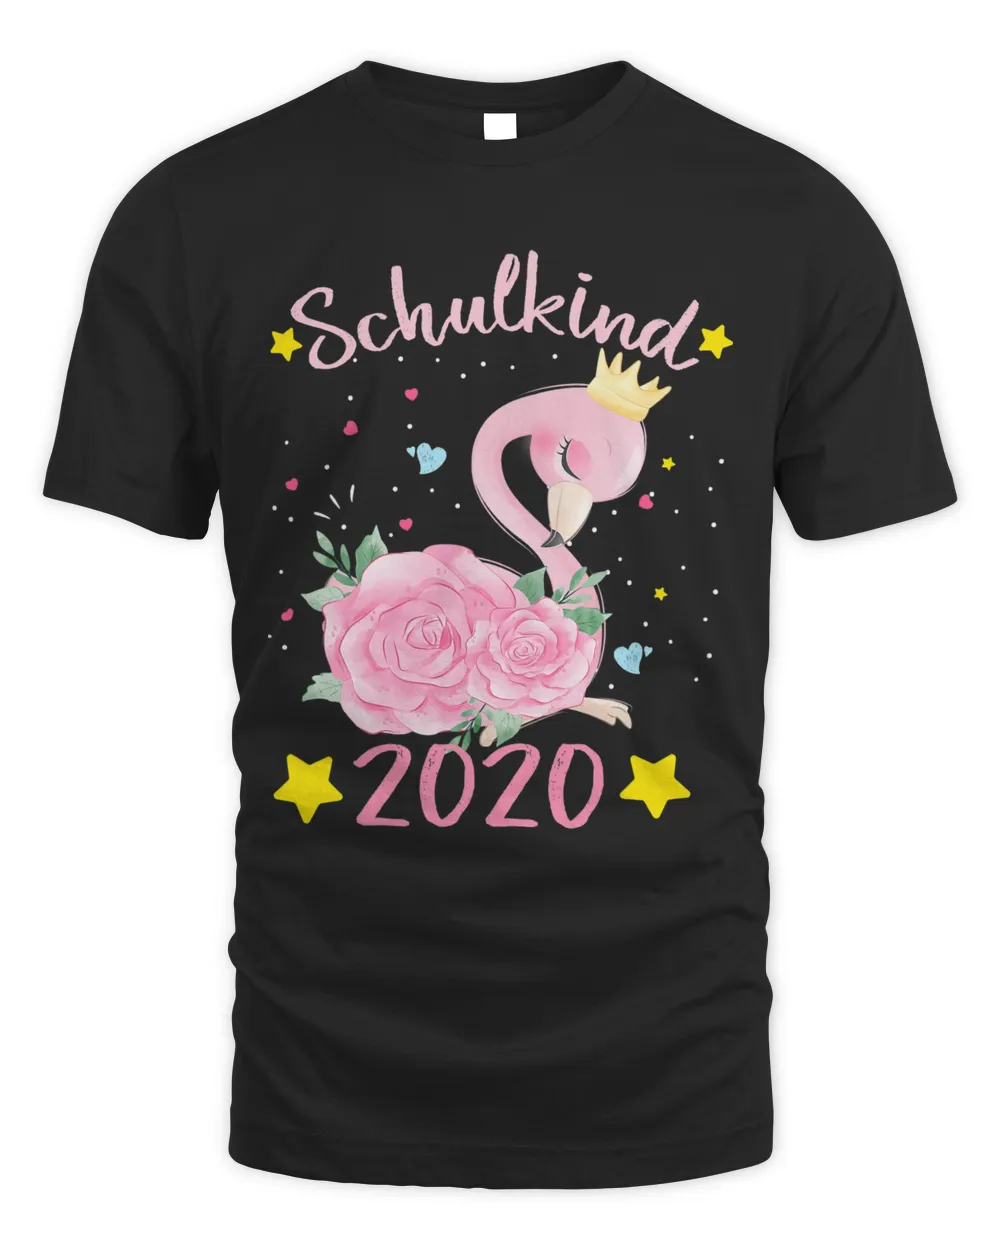 Schulkind Tropical Pink Flamingo Girl First Day of School